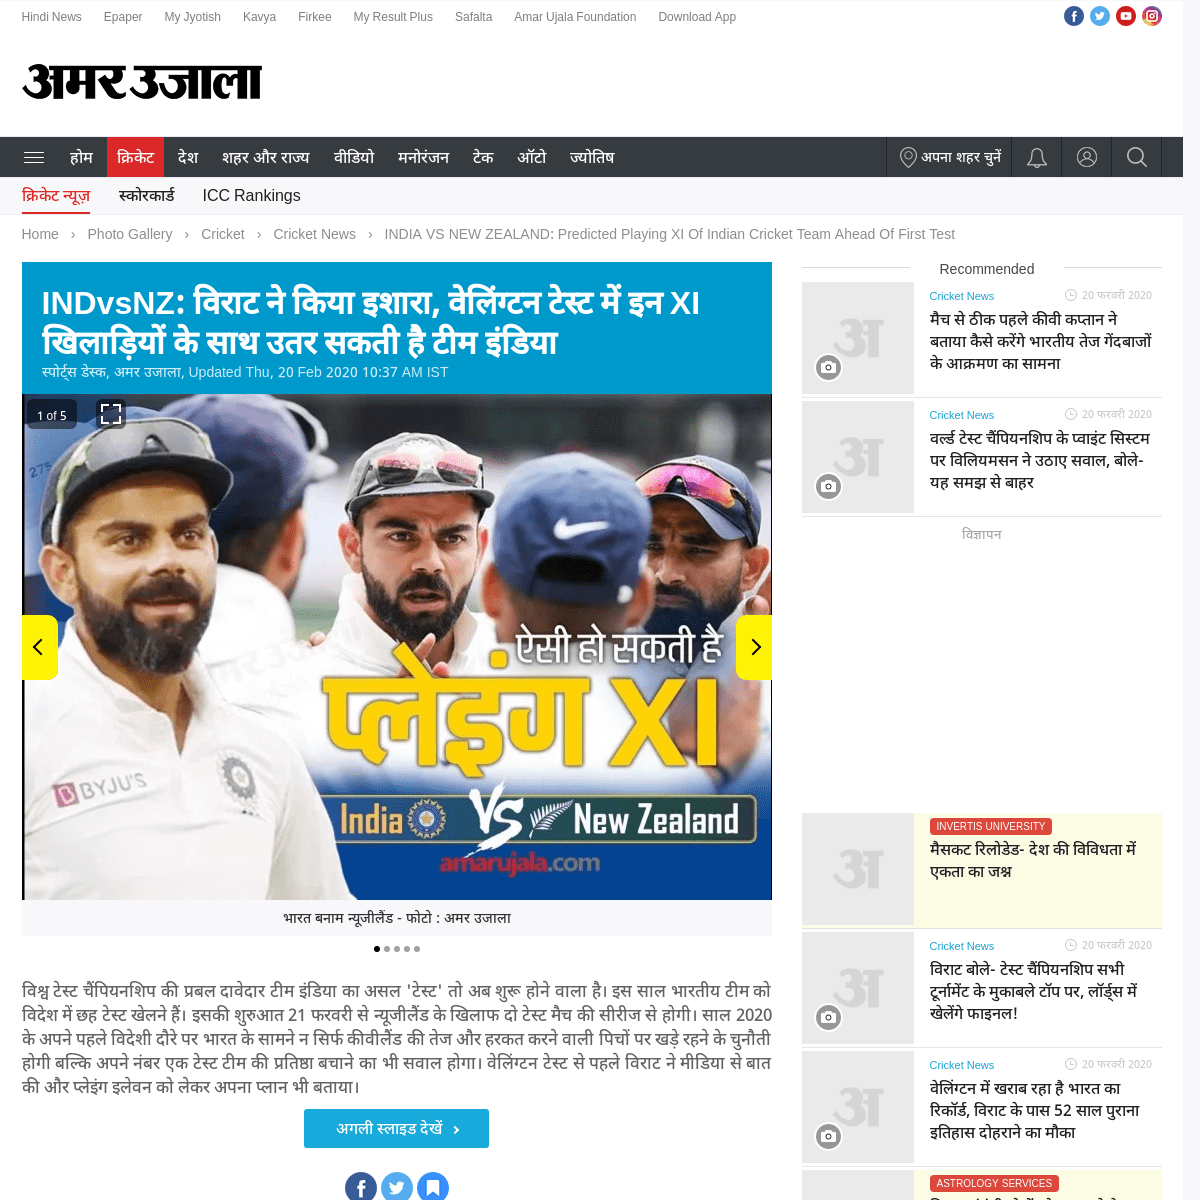 A complete backup of www.amarujala.com/cricket/cricket-news/india-vs-new-zealand-predicted-playing-xi-of-indian-cricket-team-ahe